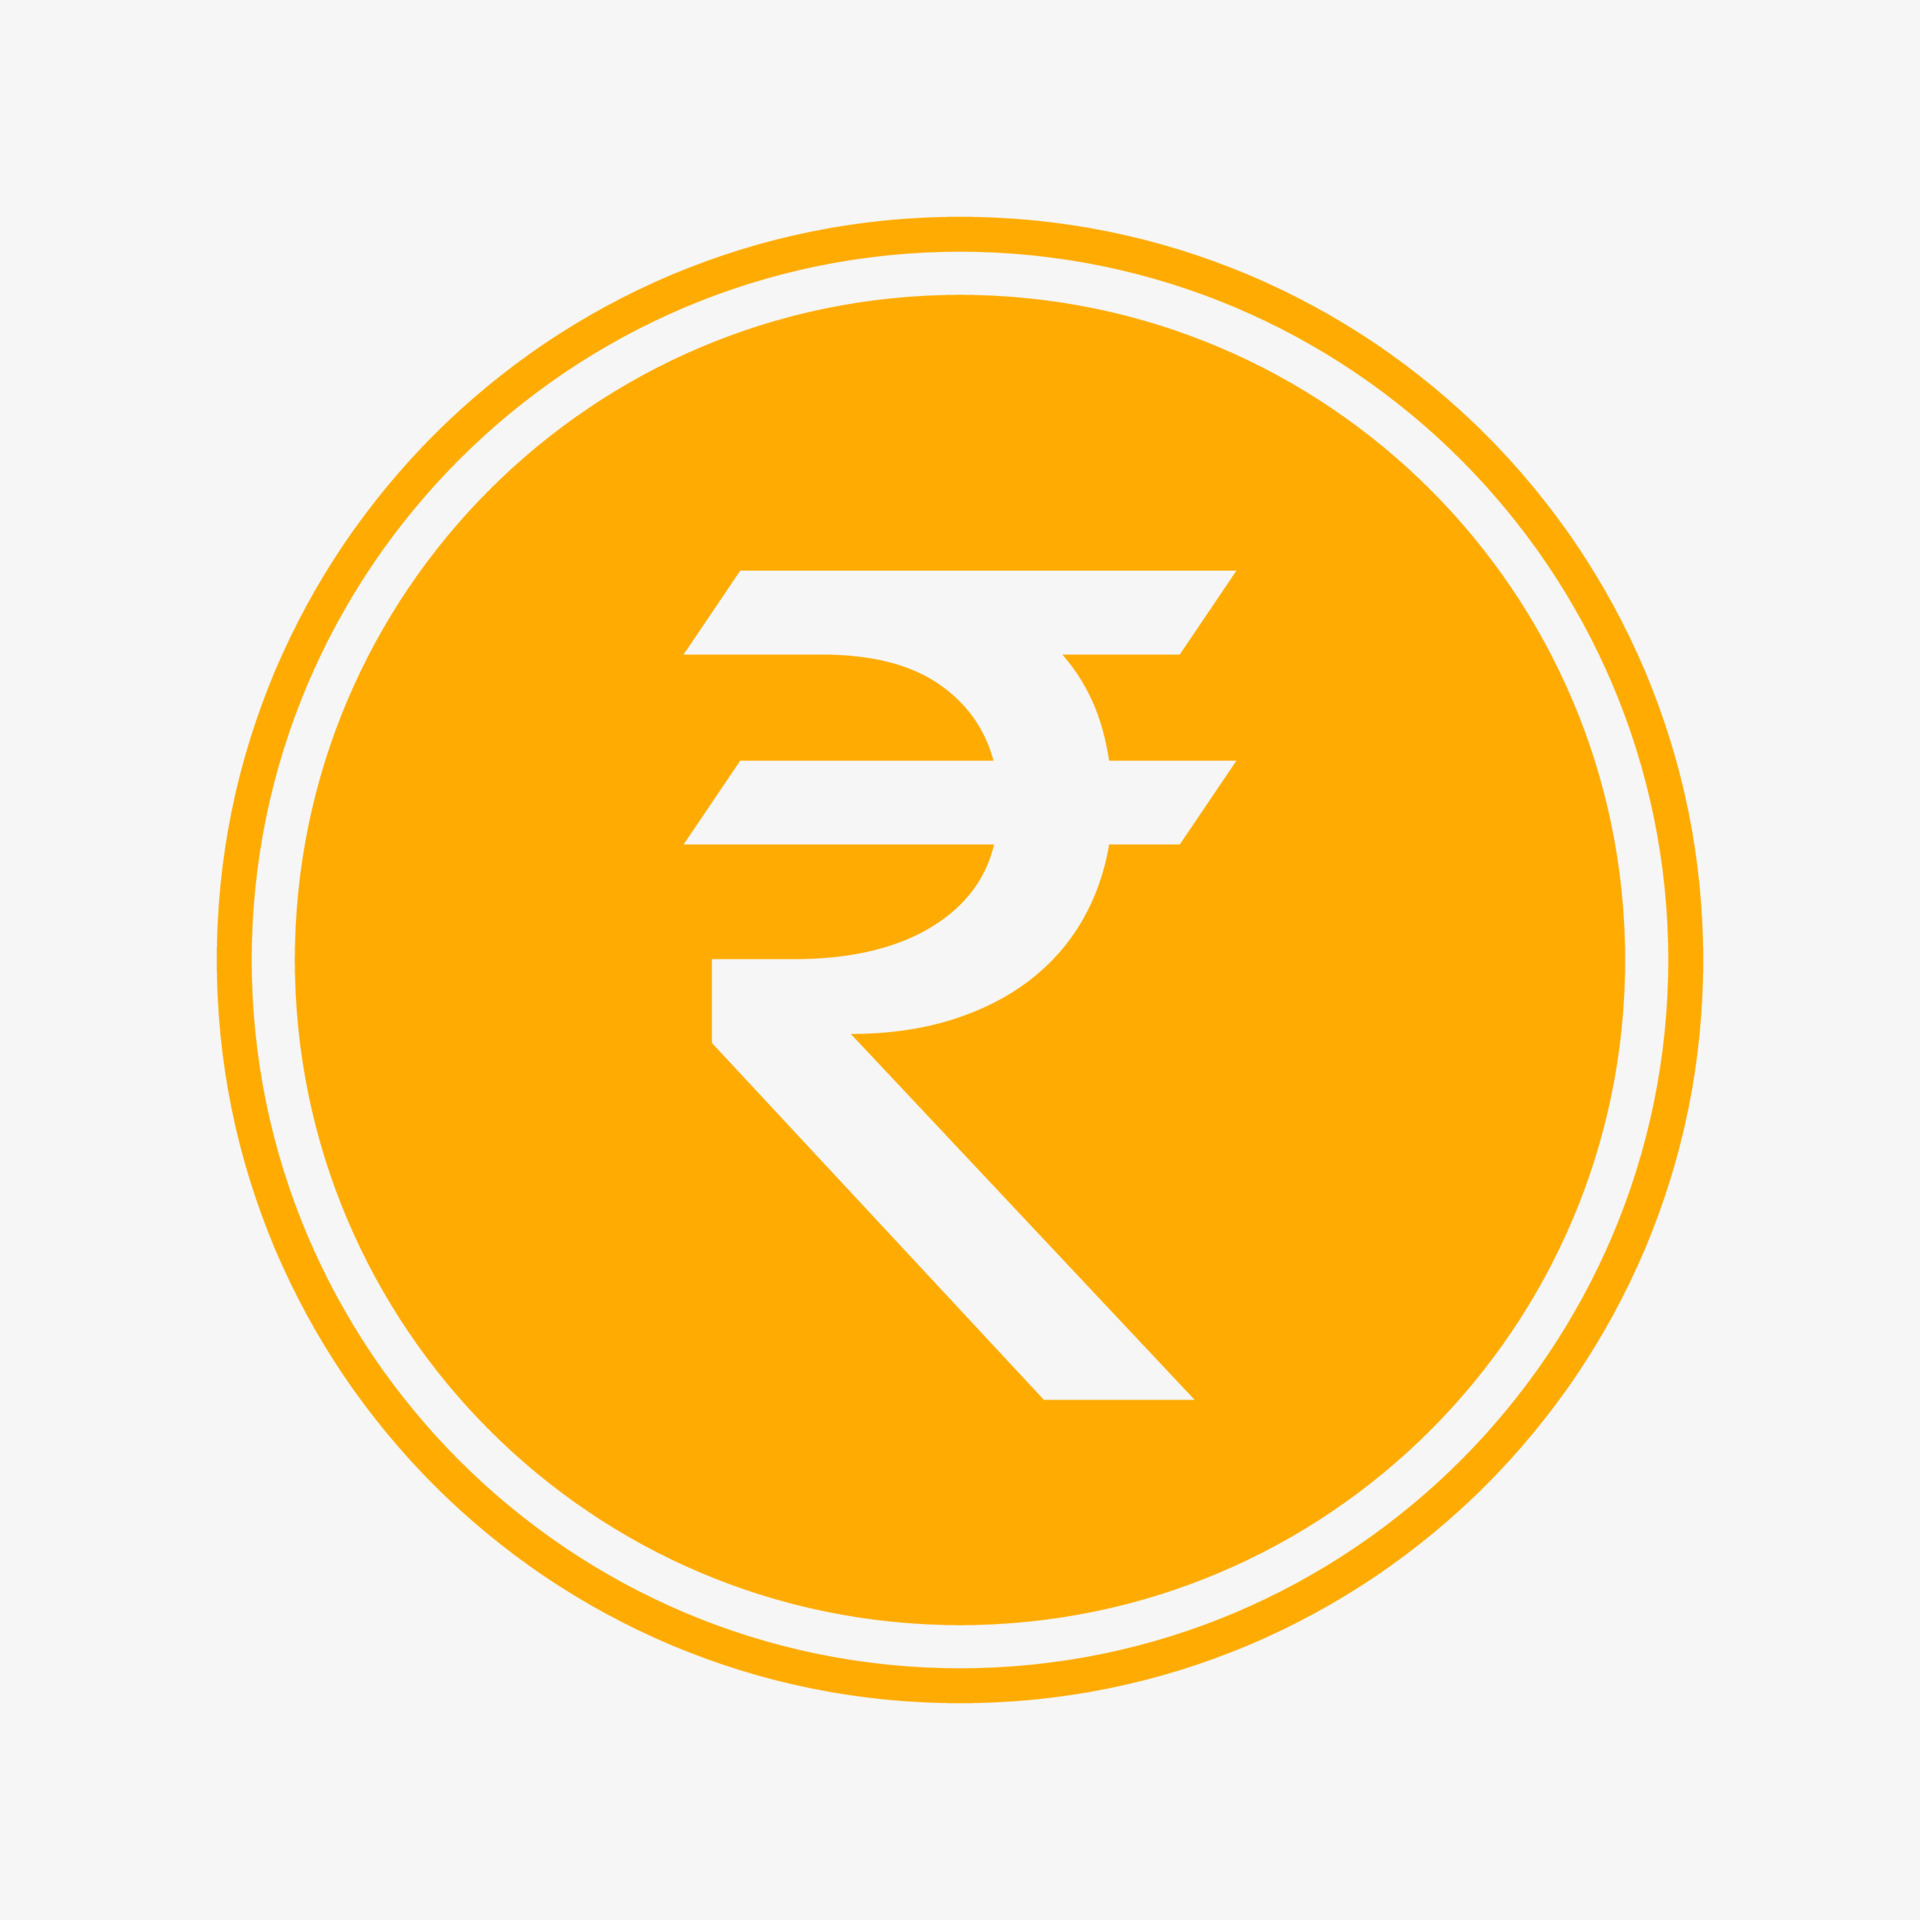 Black Indian Rupee Sign Vector Icon Stock Illustration  Download Image Now   Indian Currency Icon Symbol  iStock